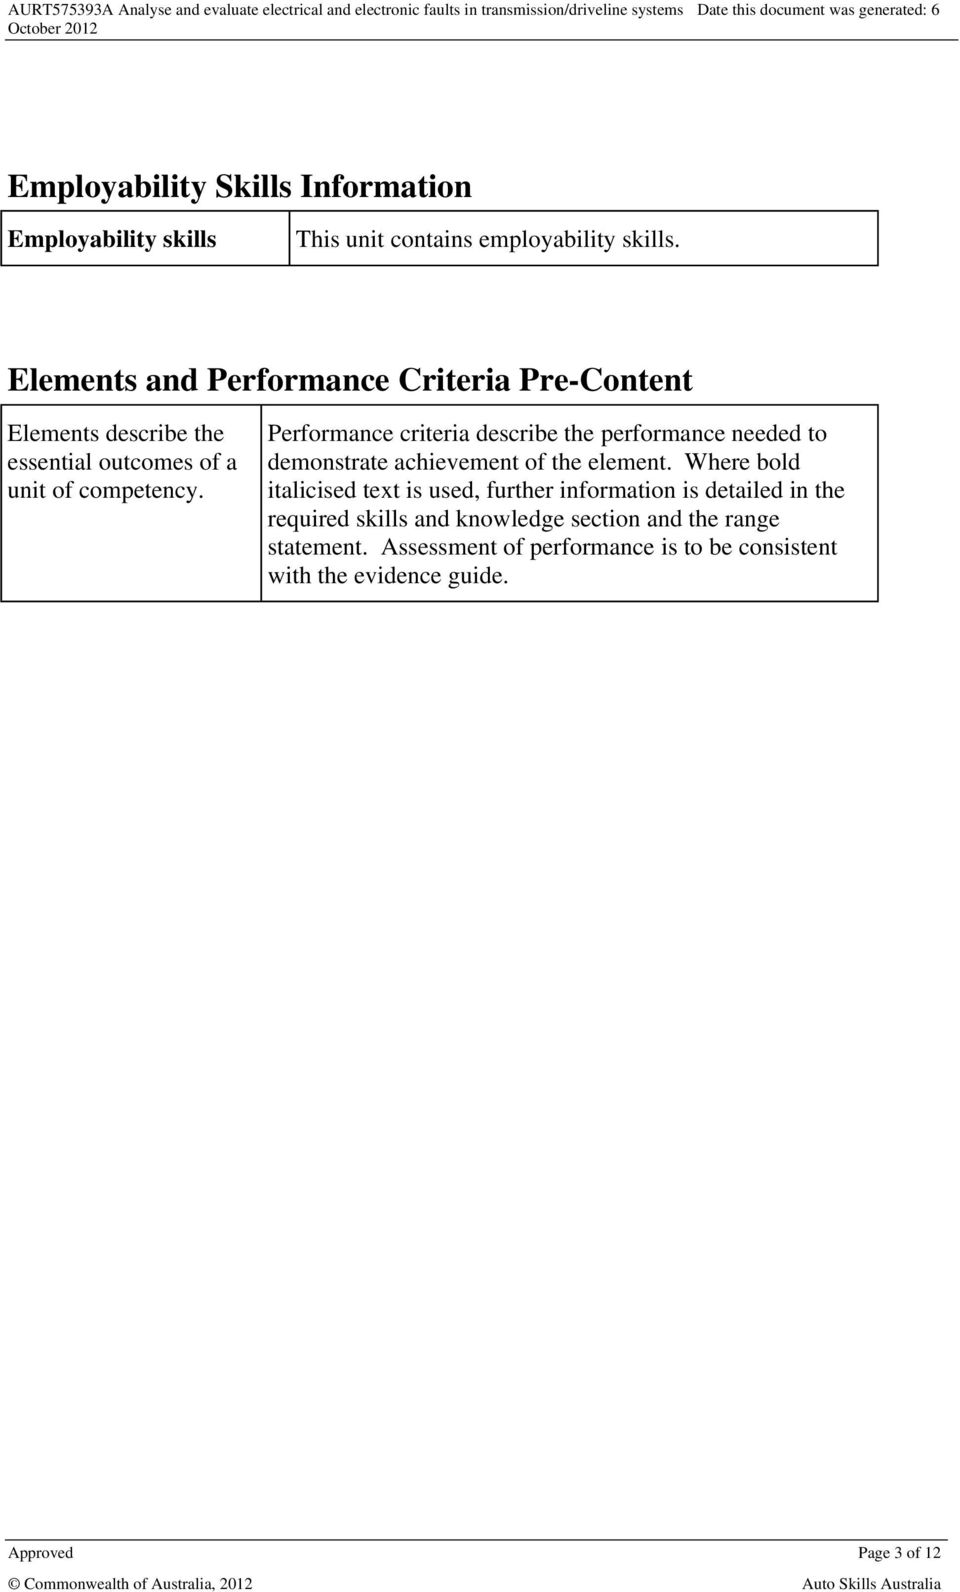 Performance criteria describe the performance needed to demonstrate achievement of the element.